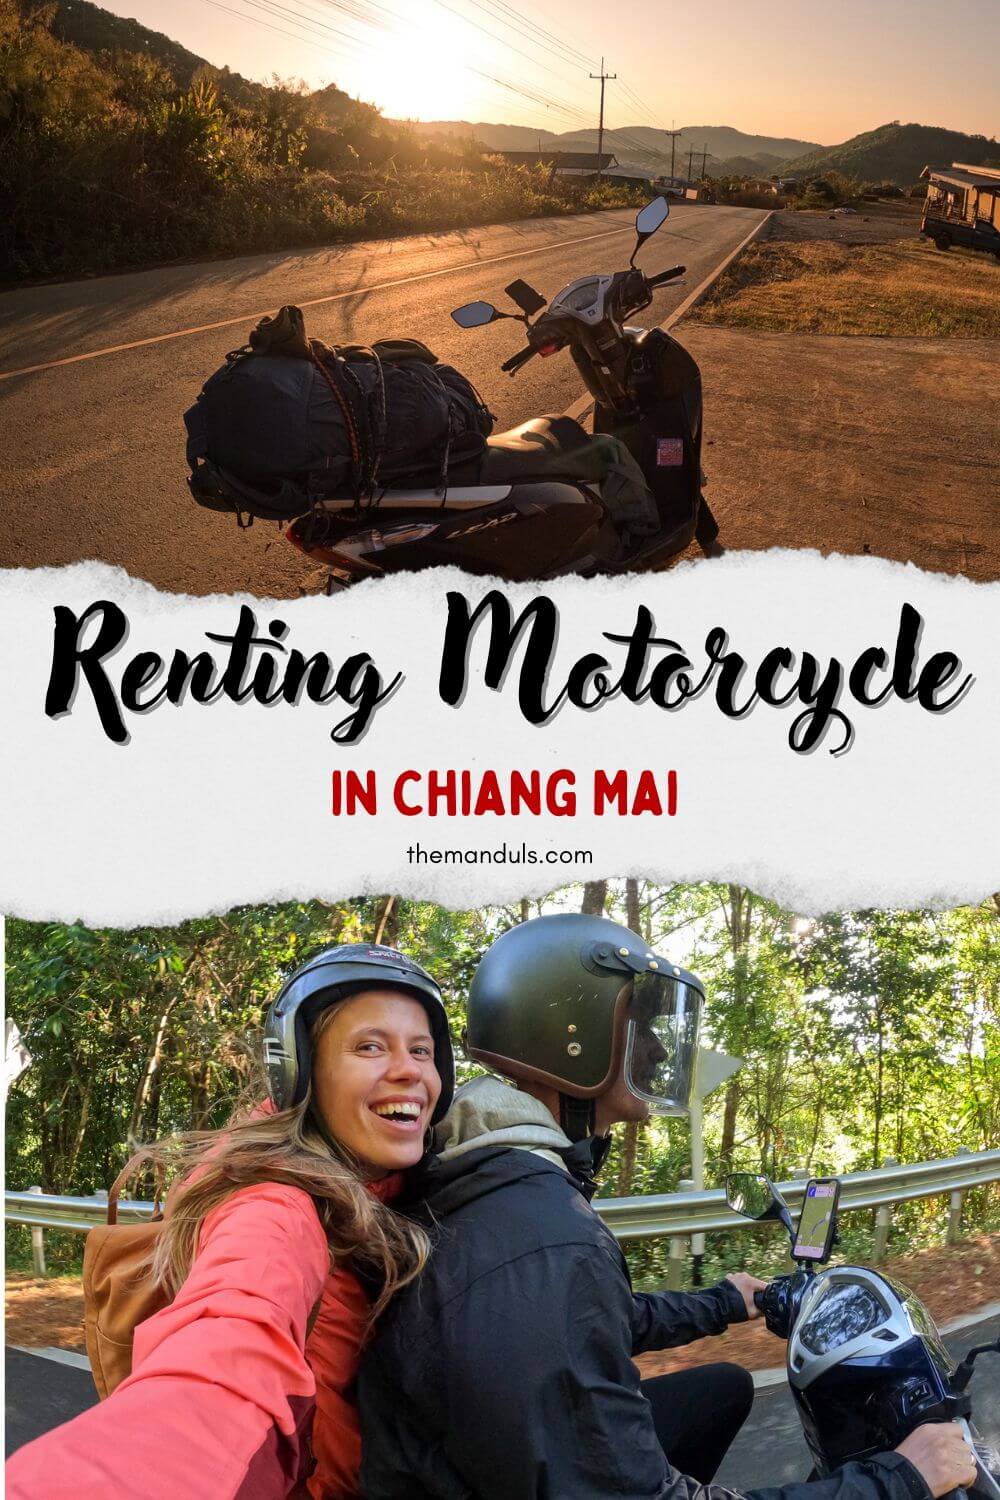 Rent motorcycle in chiang Mai pinterest